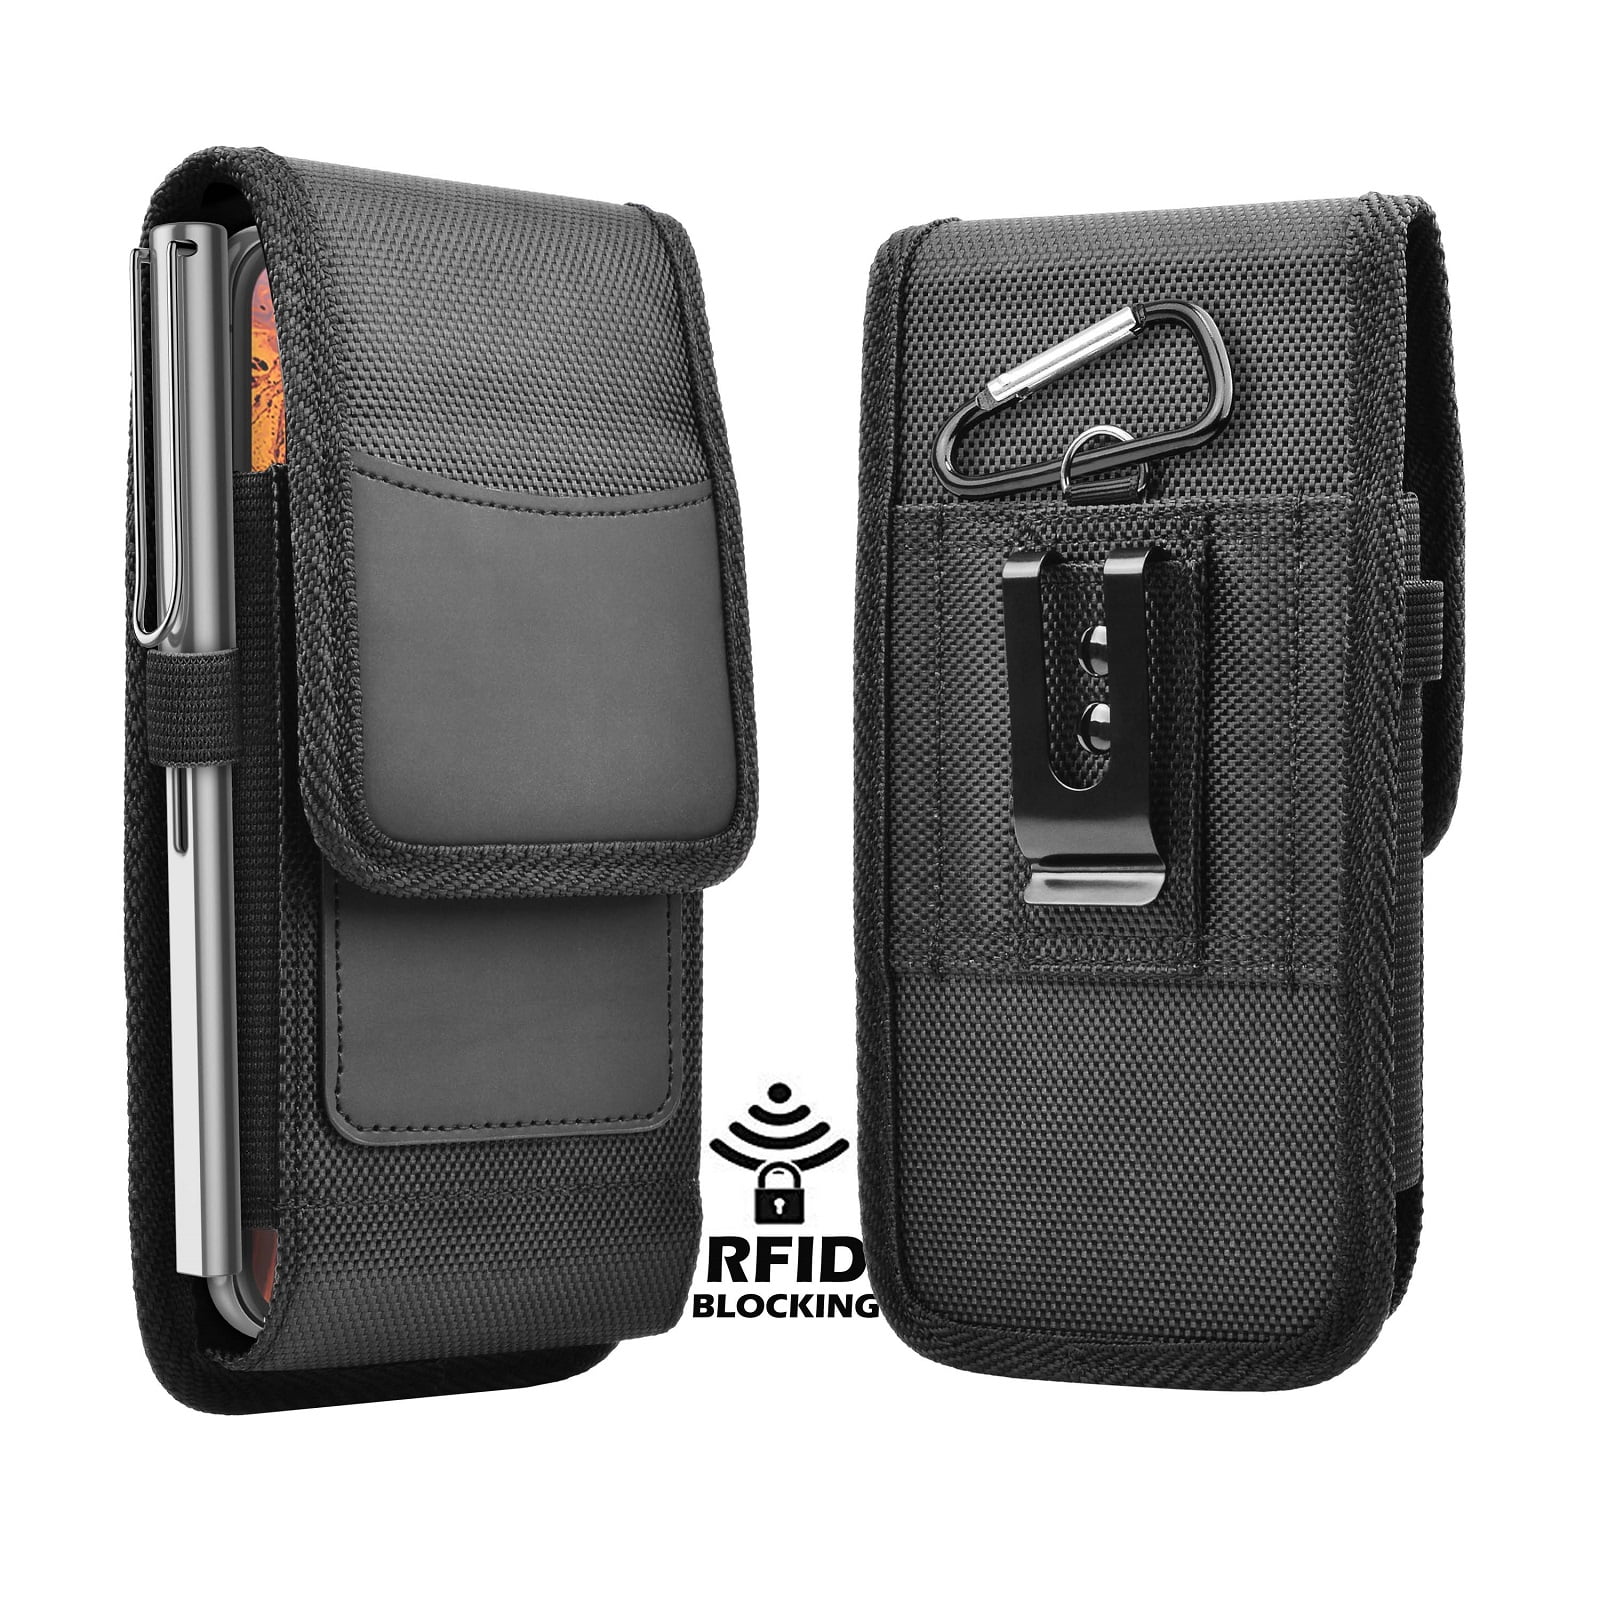 Phone Bag 2 Pouchs for Samsung Note 10Plus 9 8 for iPhone 11 Pro Max XS Max 6 7 8 plus Belt Clip Holster Case for Phone Mobile